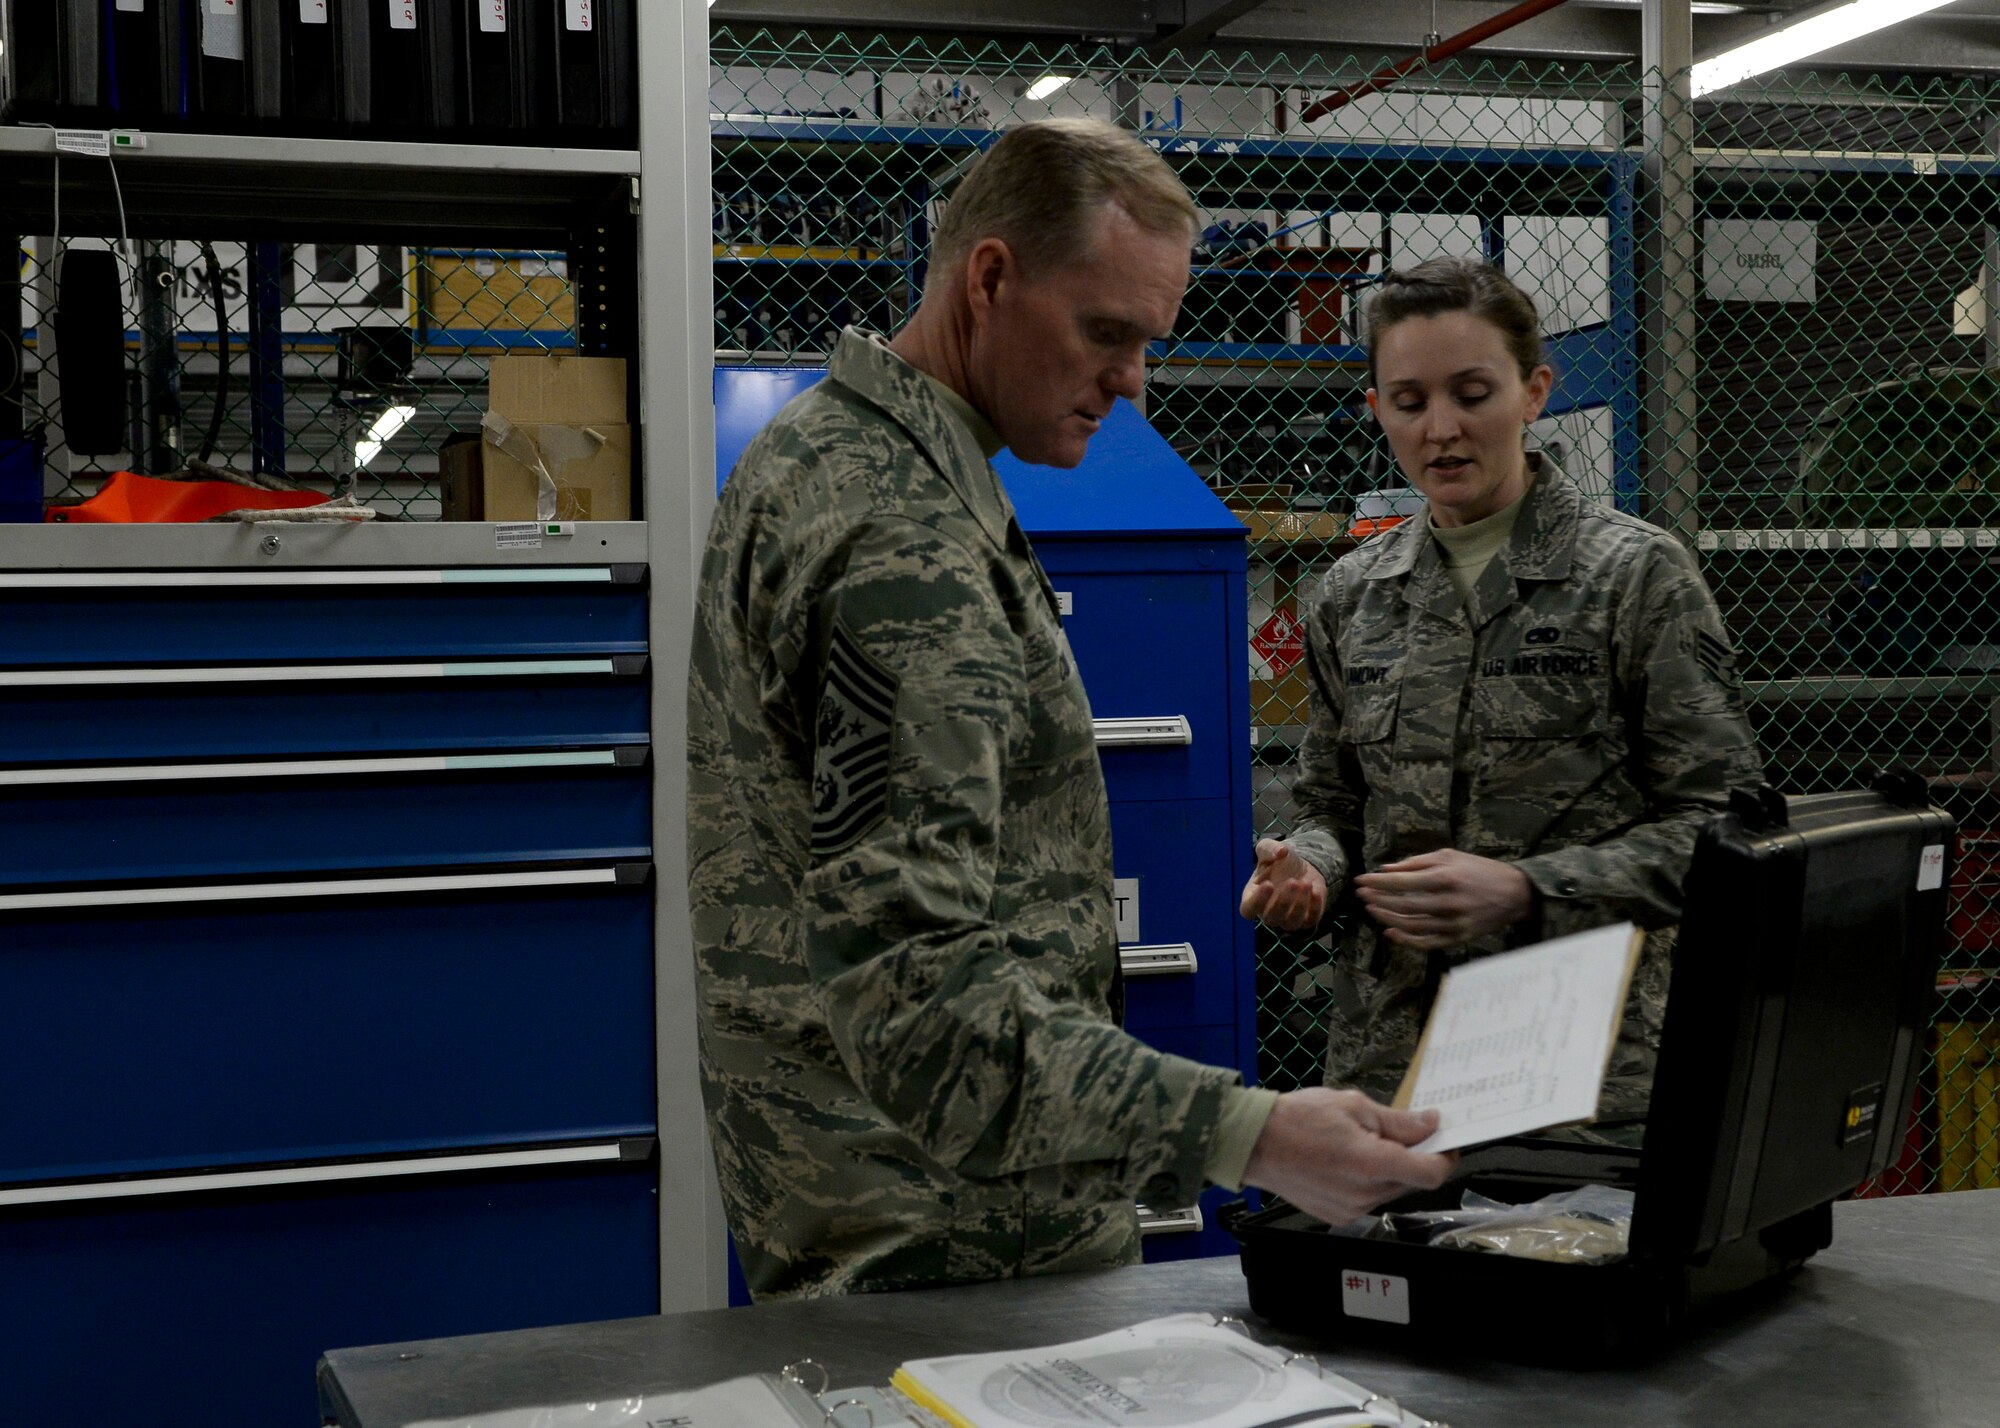 U.S. Air Force Senior Airman Ashley Lamont, 100th Aircraft Maintenance Squadron crew chief, shows Chief Master Sgt. of the Air Force James Cody a window replacement kit Jan. 28, 2016, on RAF Mildenhall, England. Cody met with Airmen from multiple units during his visit including the 352nd Special Operations Wing, the 95th Reconnaissance Squadron and the 488th Intelligence Squadron. (U.S. Air Force photo by Senior Airman Victoria H. Taylor/Released)